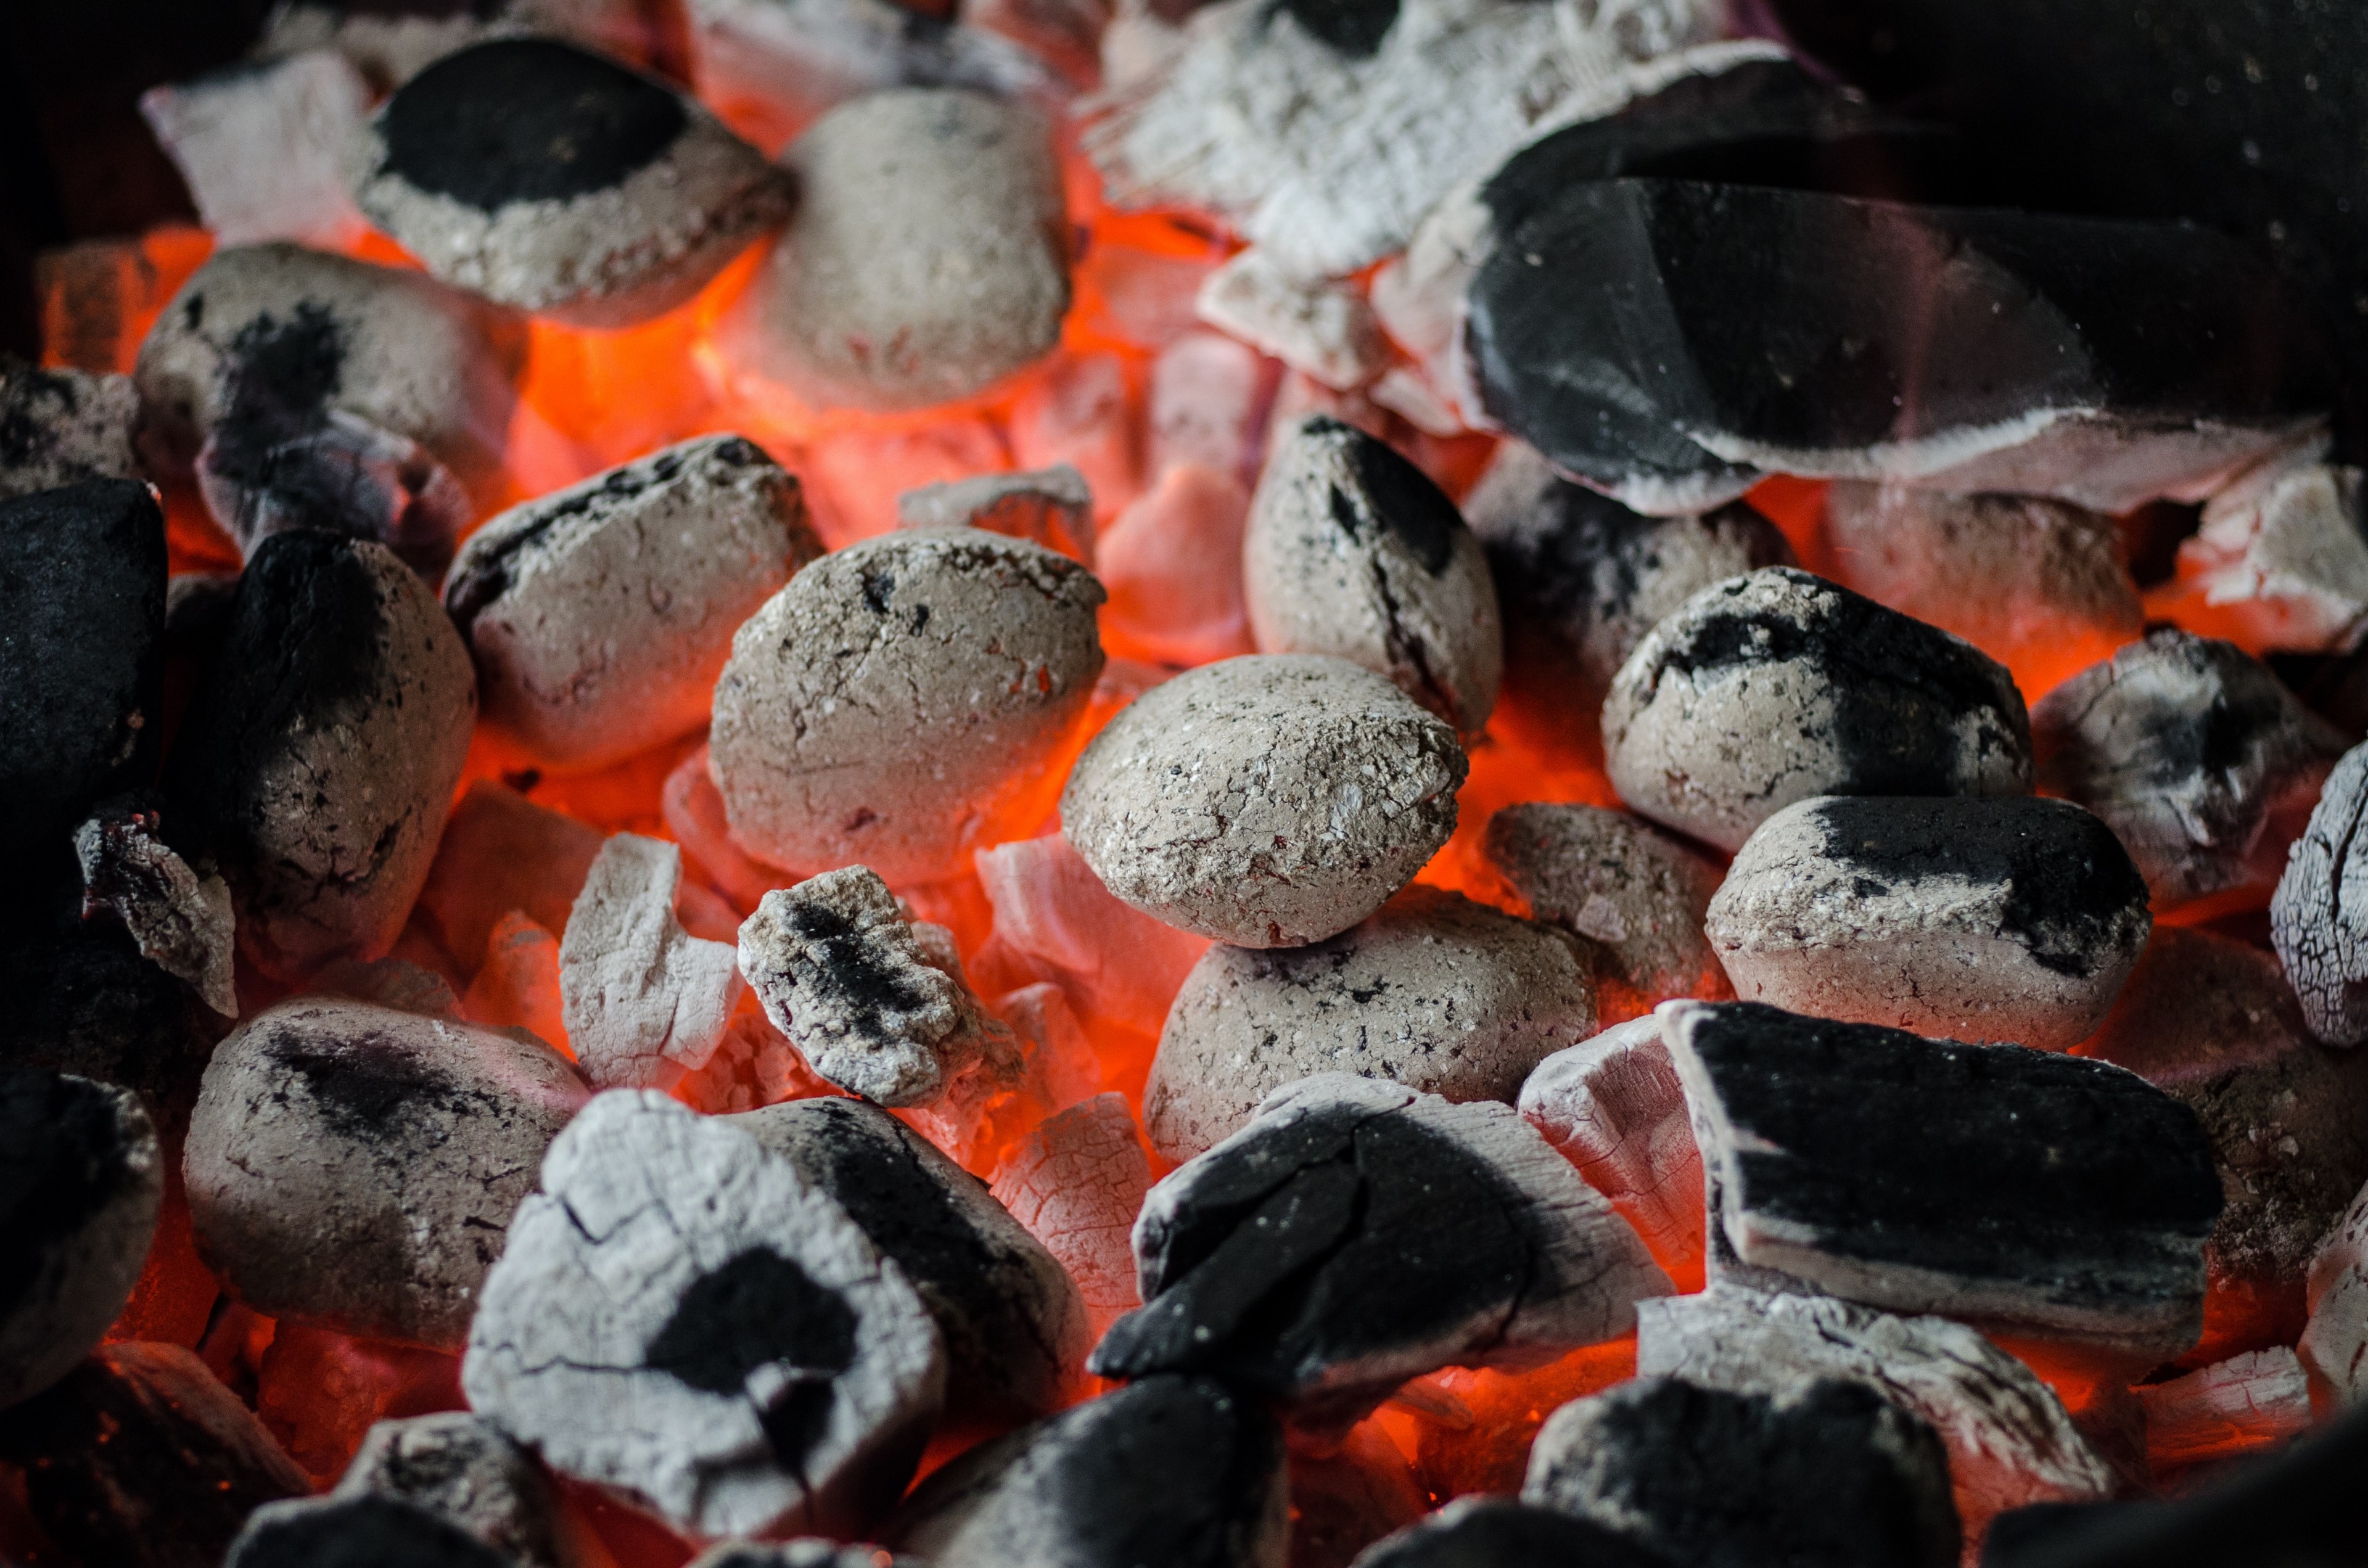 #3840x2543 #bbq #barbecue #coal #flame #grill #barbeque - Mejor Carbon Para Asar Carne , HD Wallpaper & Backgrounds